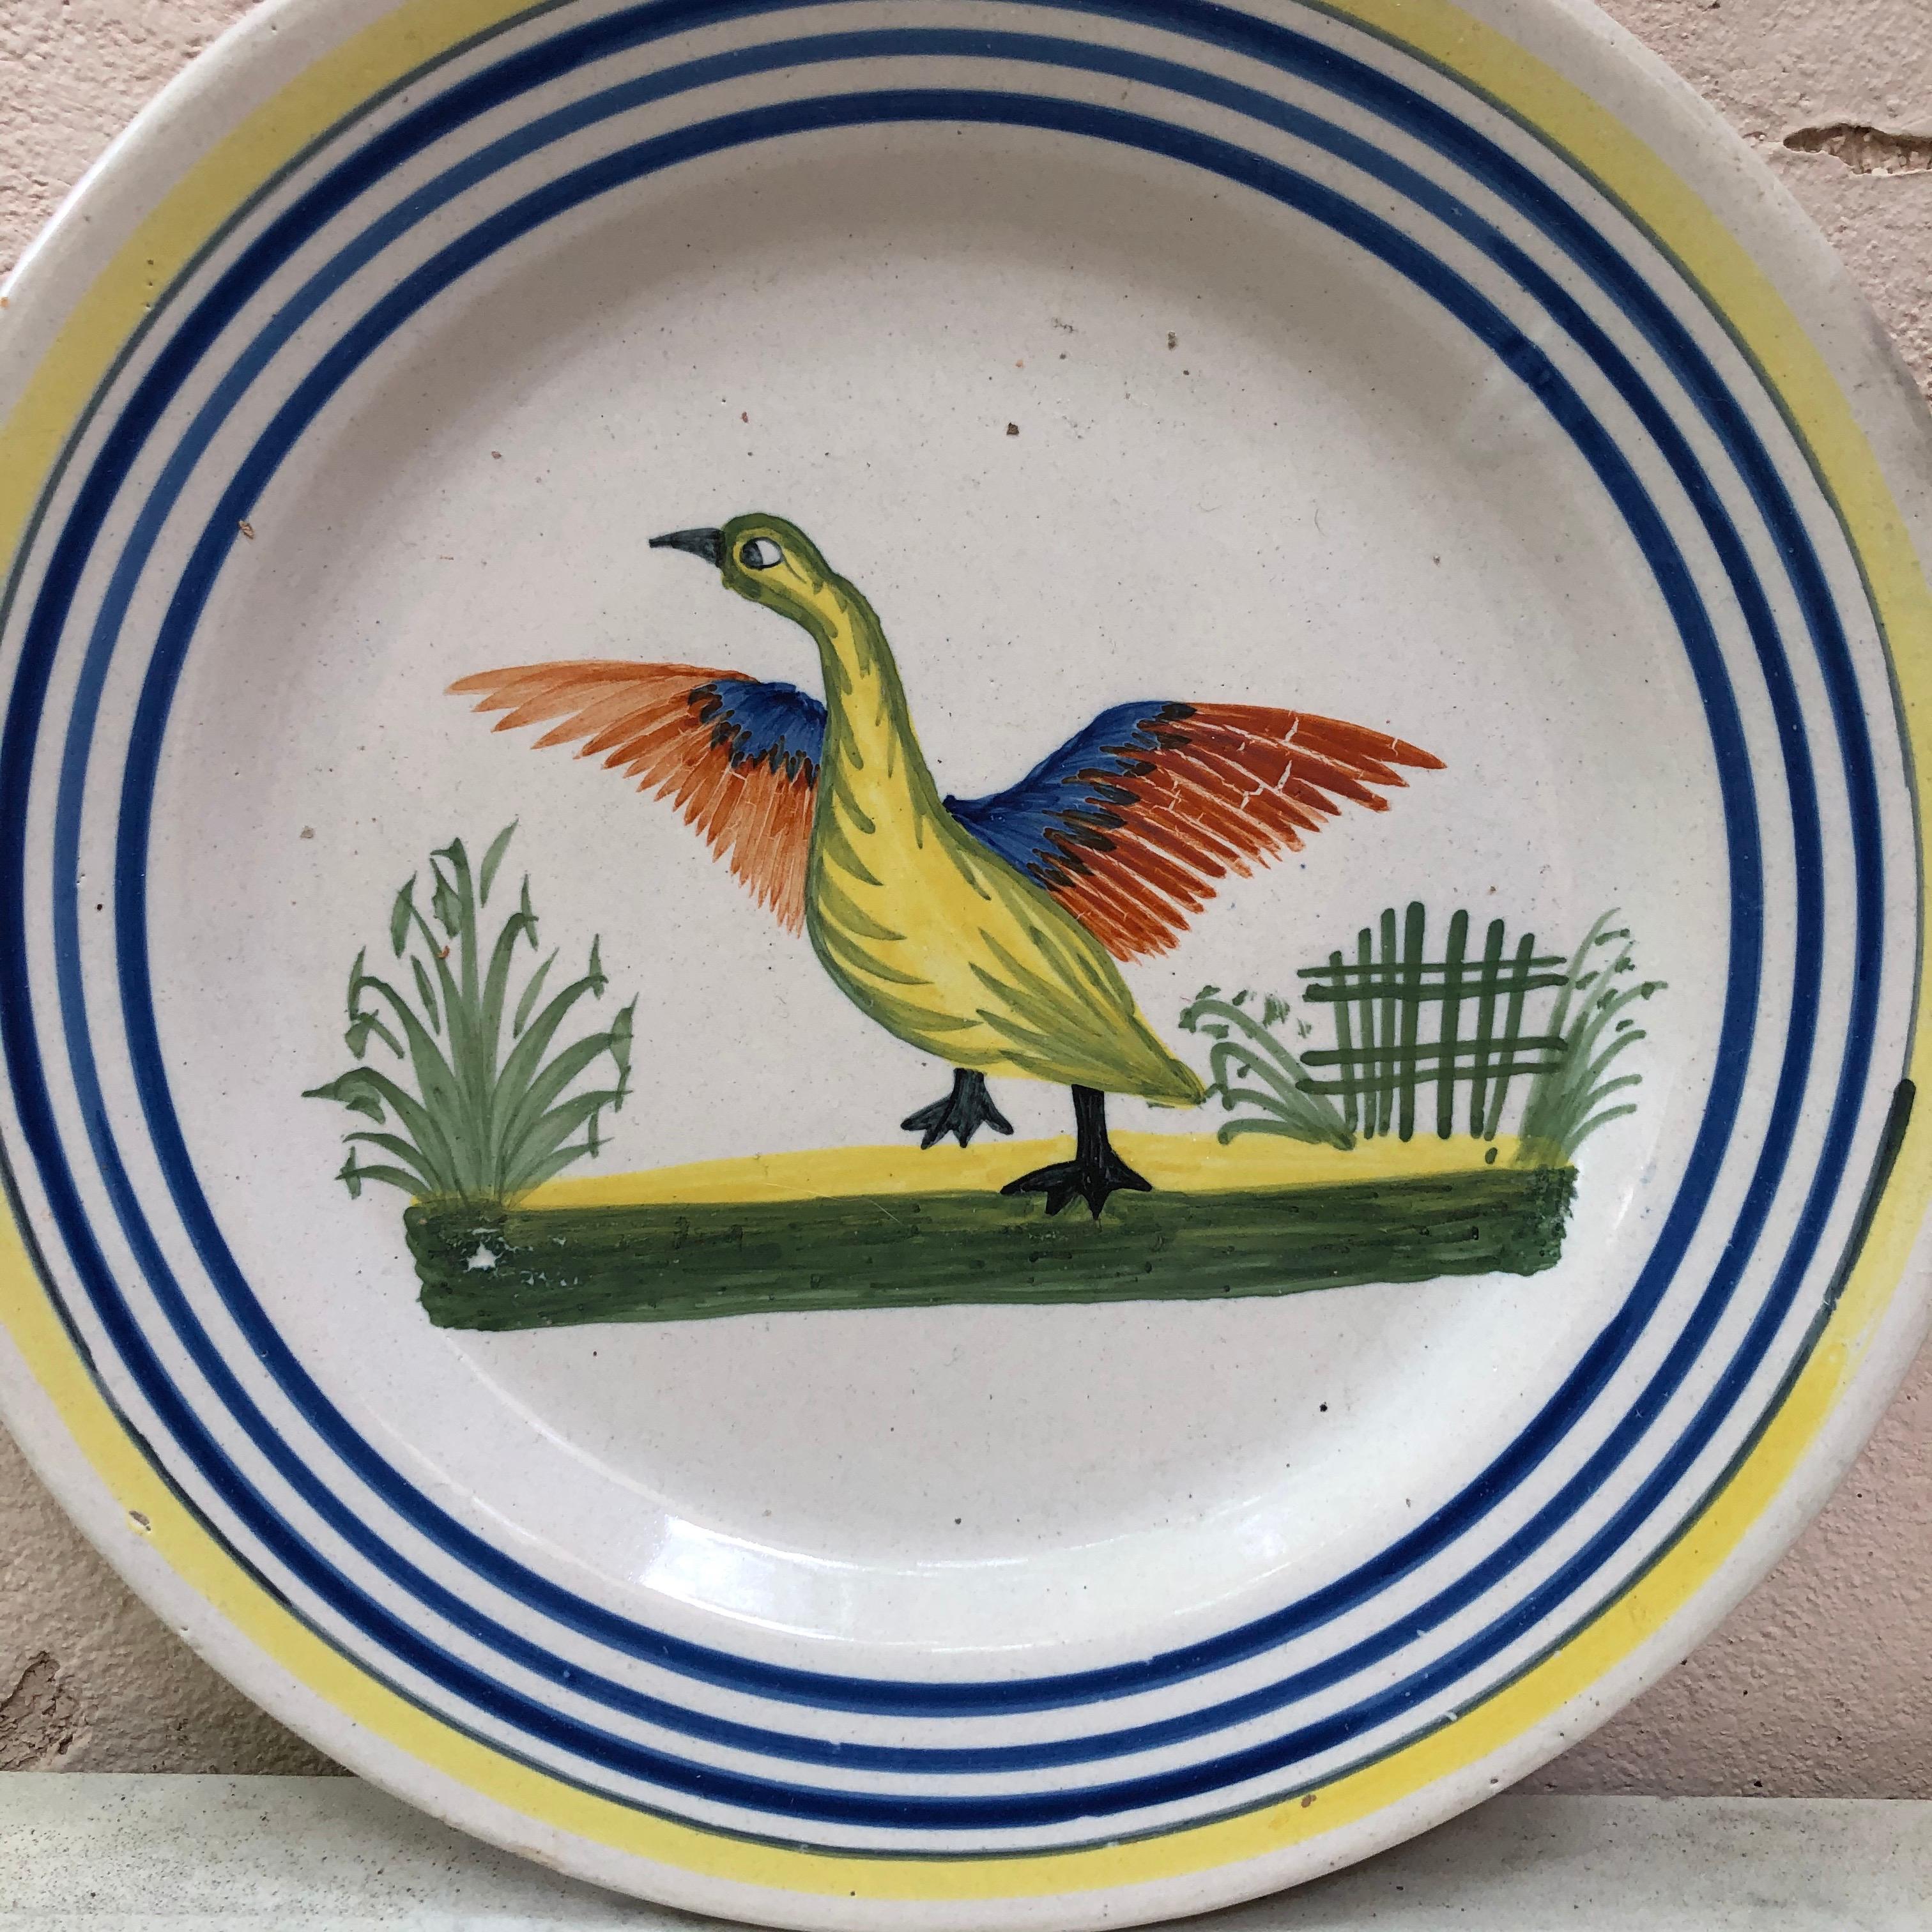 A French large faience plate with a bird signed Henriot Quimper, circa 1950.
Colorful yellow border and blue lines.
Measure: 9.5